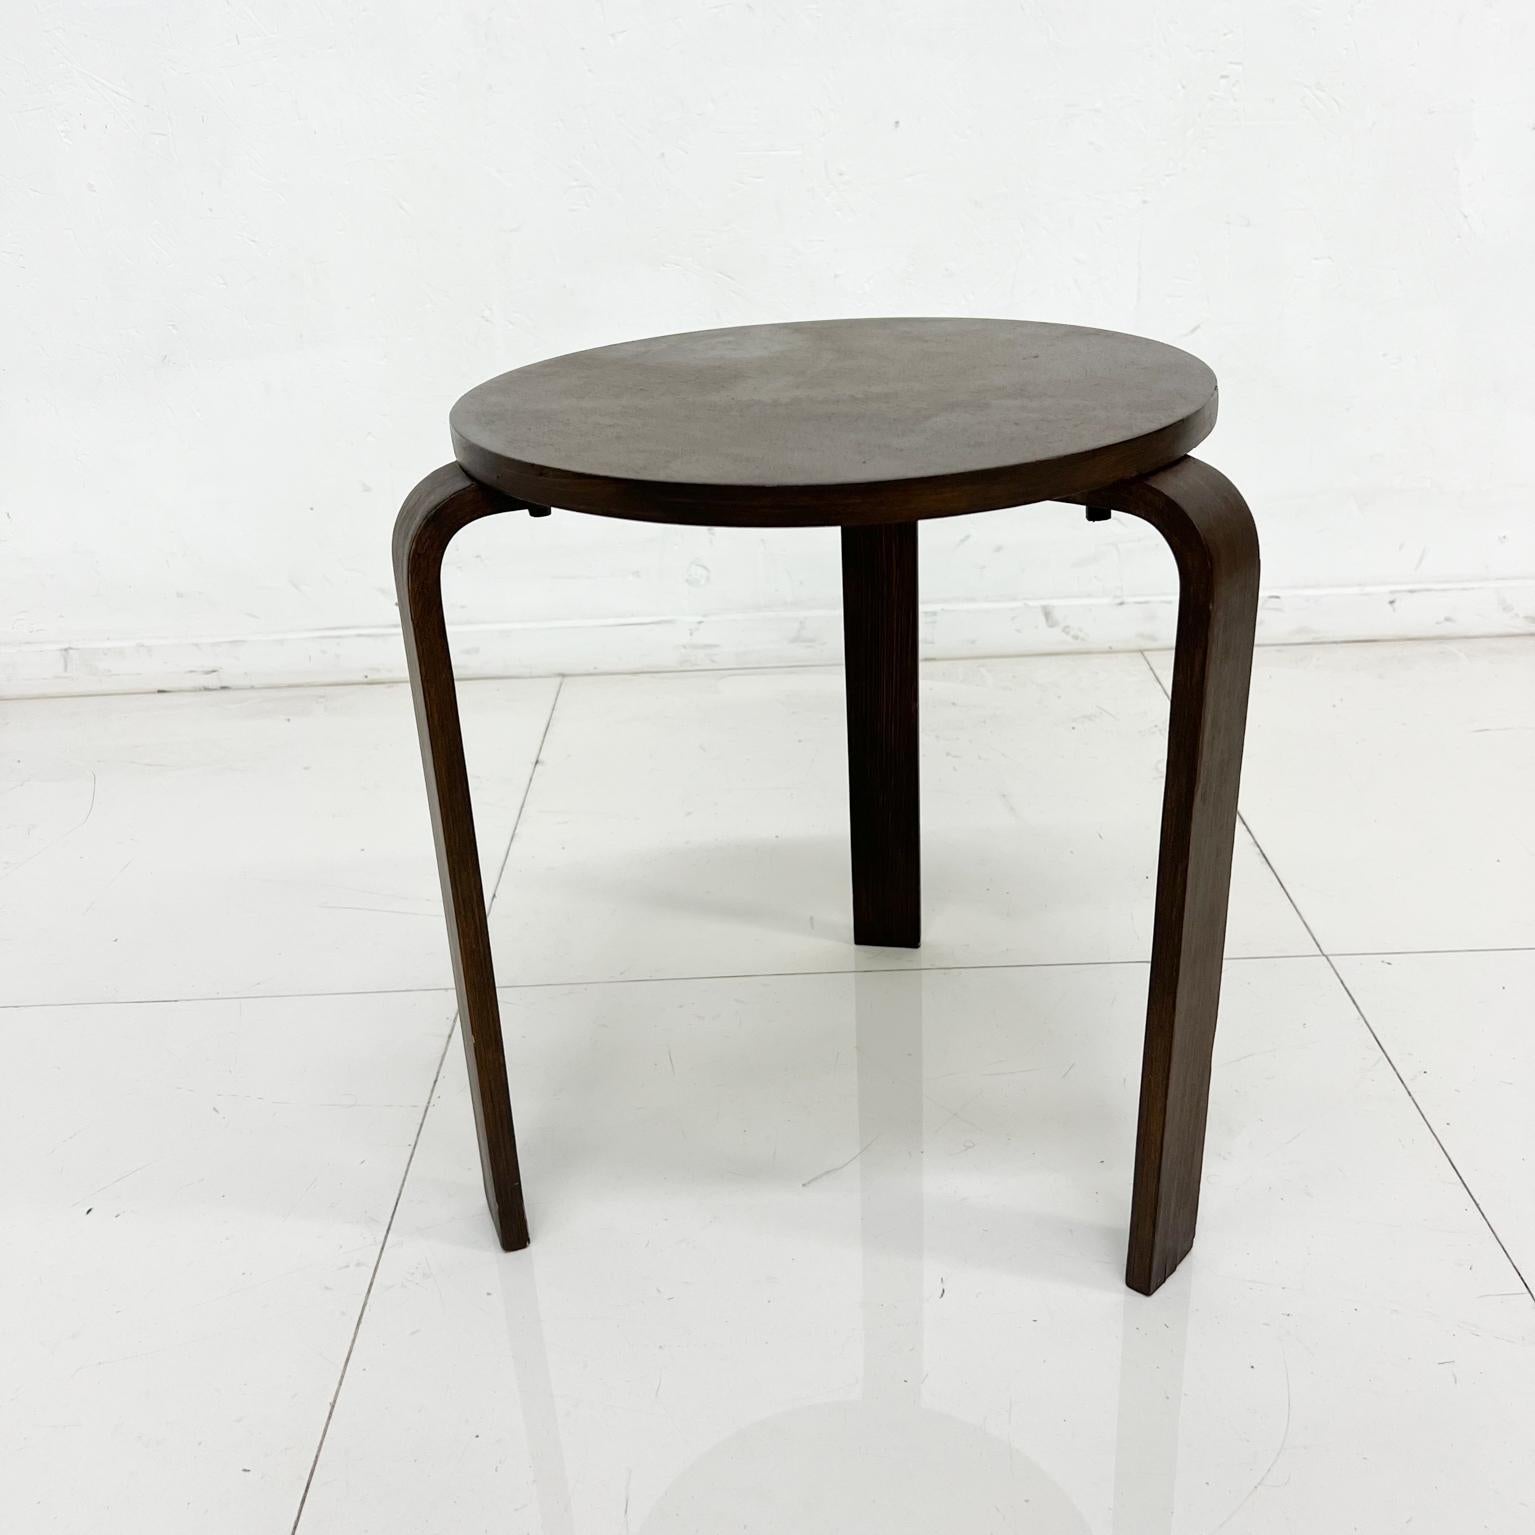 1980s low wood stool Design by Alvar Aalto for Artek Denmark
Scandinavian Modern Classic
Dark stained wood.
Useful as a small side table.
Measures: 17.5 tall x 15.5 depth
Original vintage preowned condition.
 It has a repair on the legs. Hard